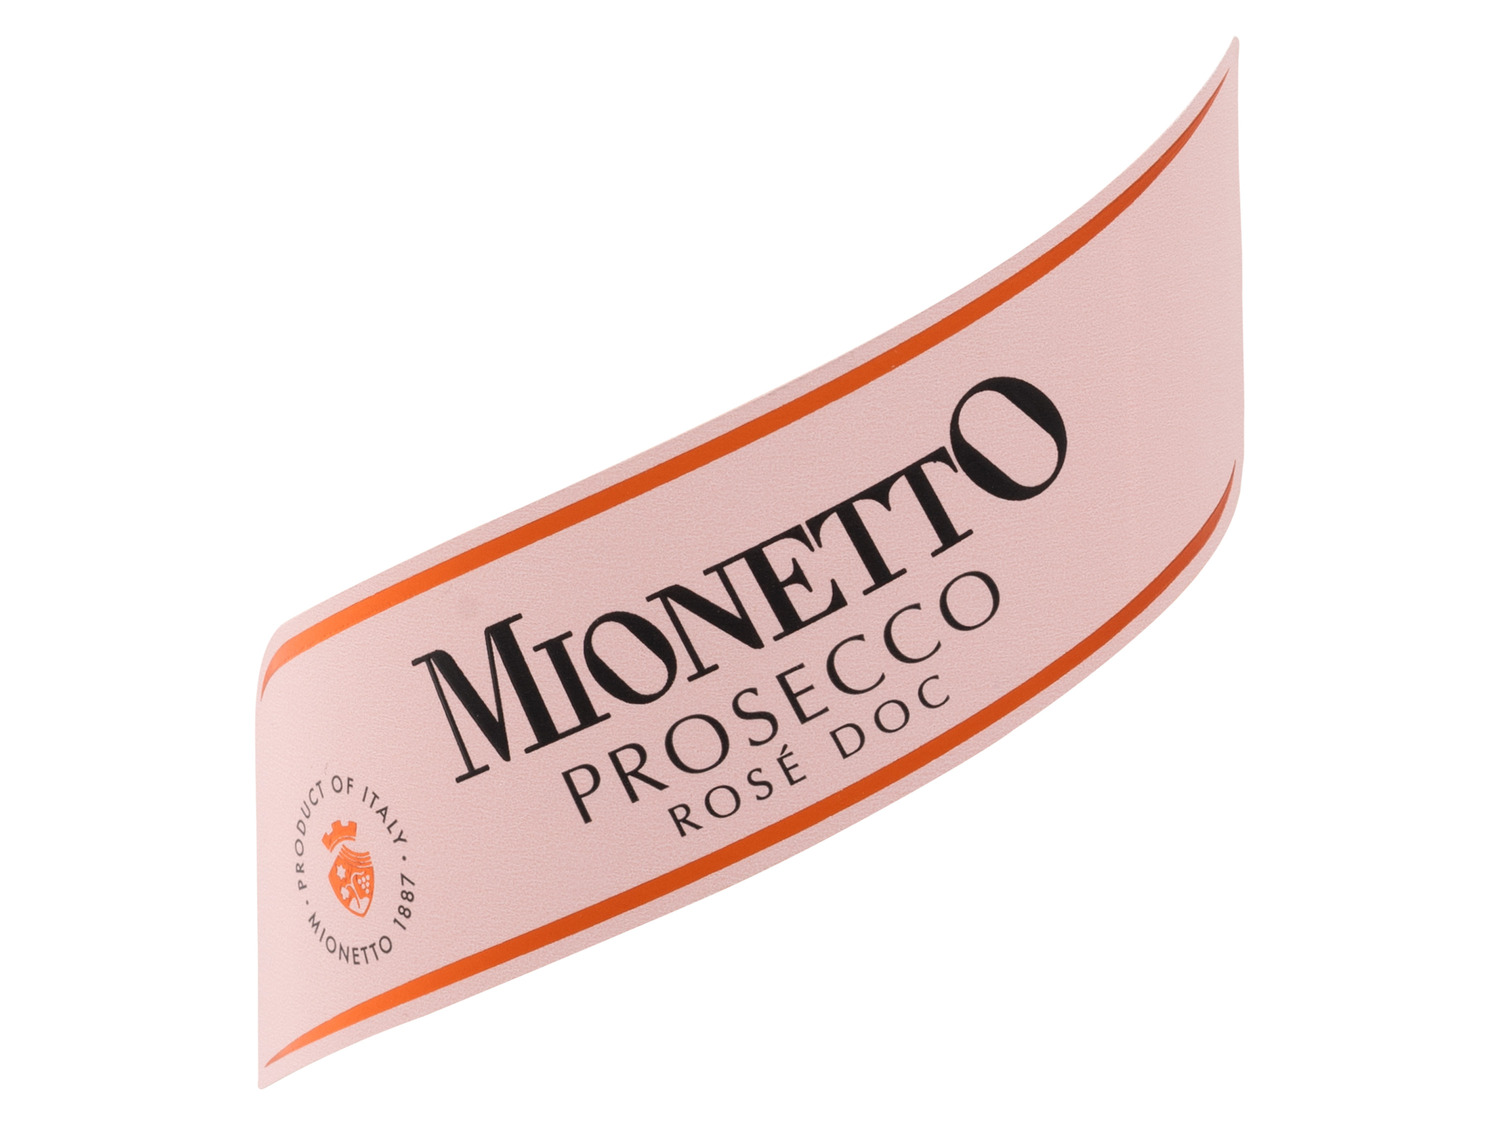 extra | Mionetto Rosé Prosecco Schaumwein dry, LIDL DOC